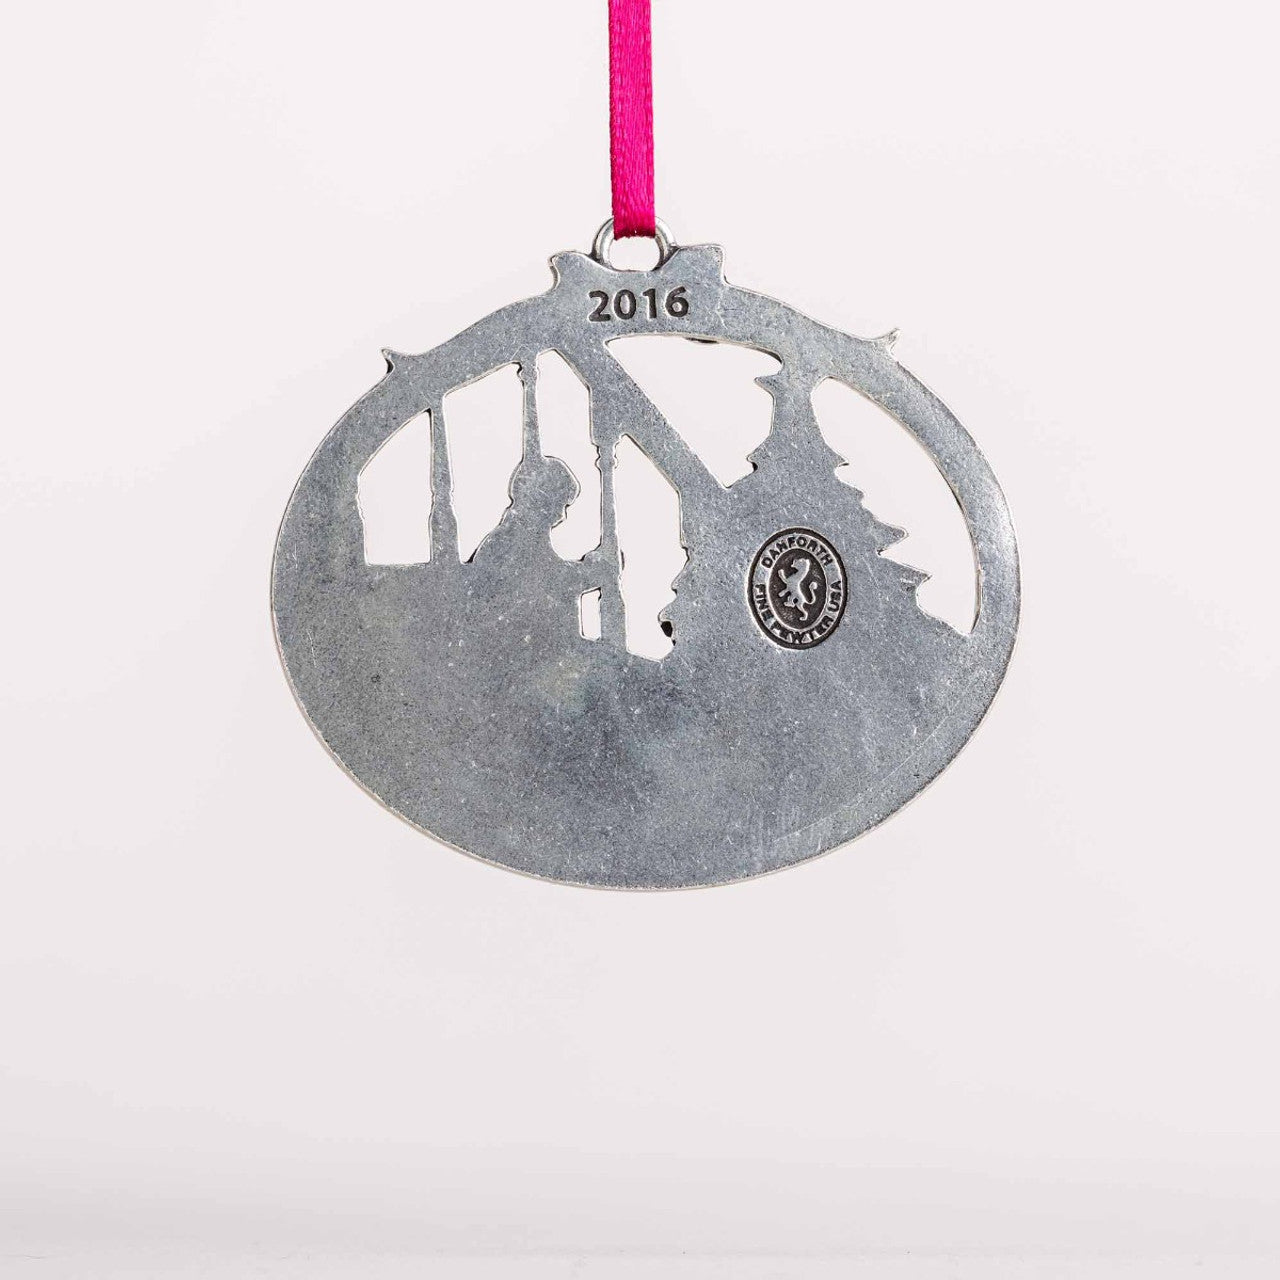 Danforth Pewter Magic of Christmas Ornament. Lion and 2016 touchmark engraved on the back of ornament.